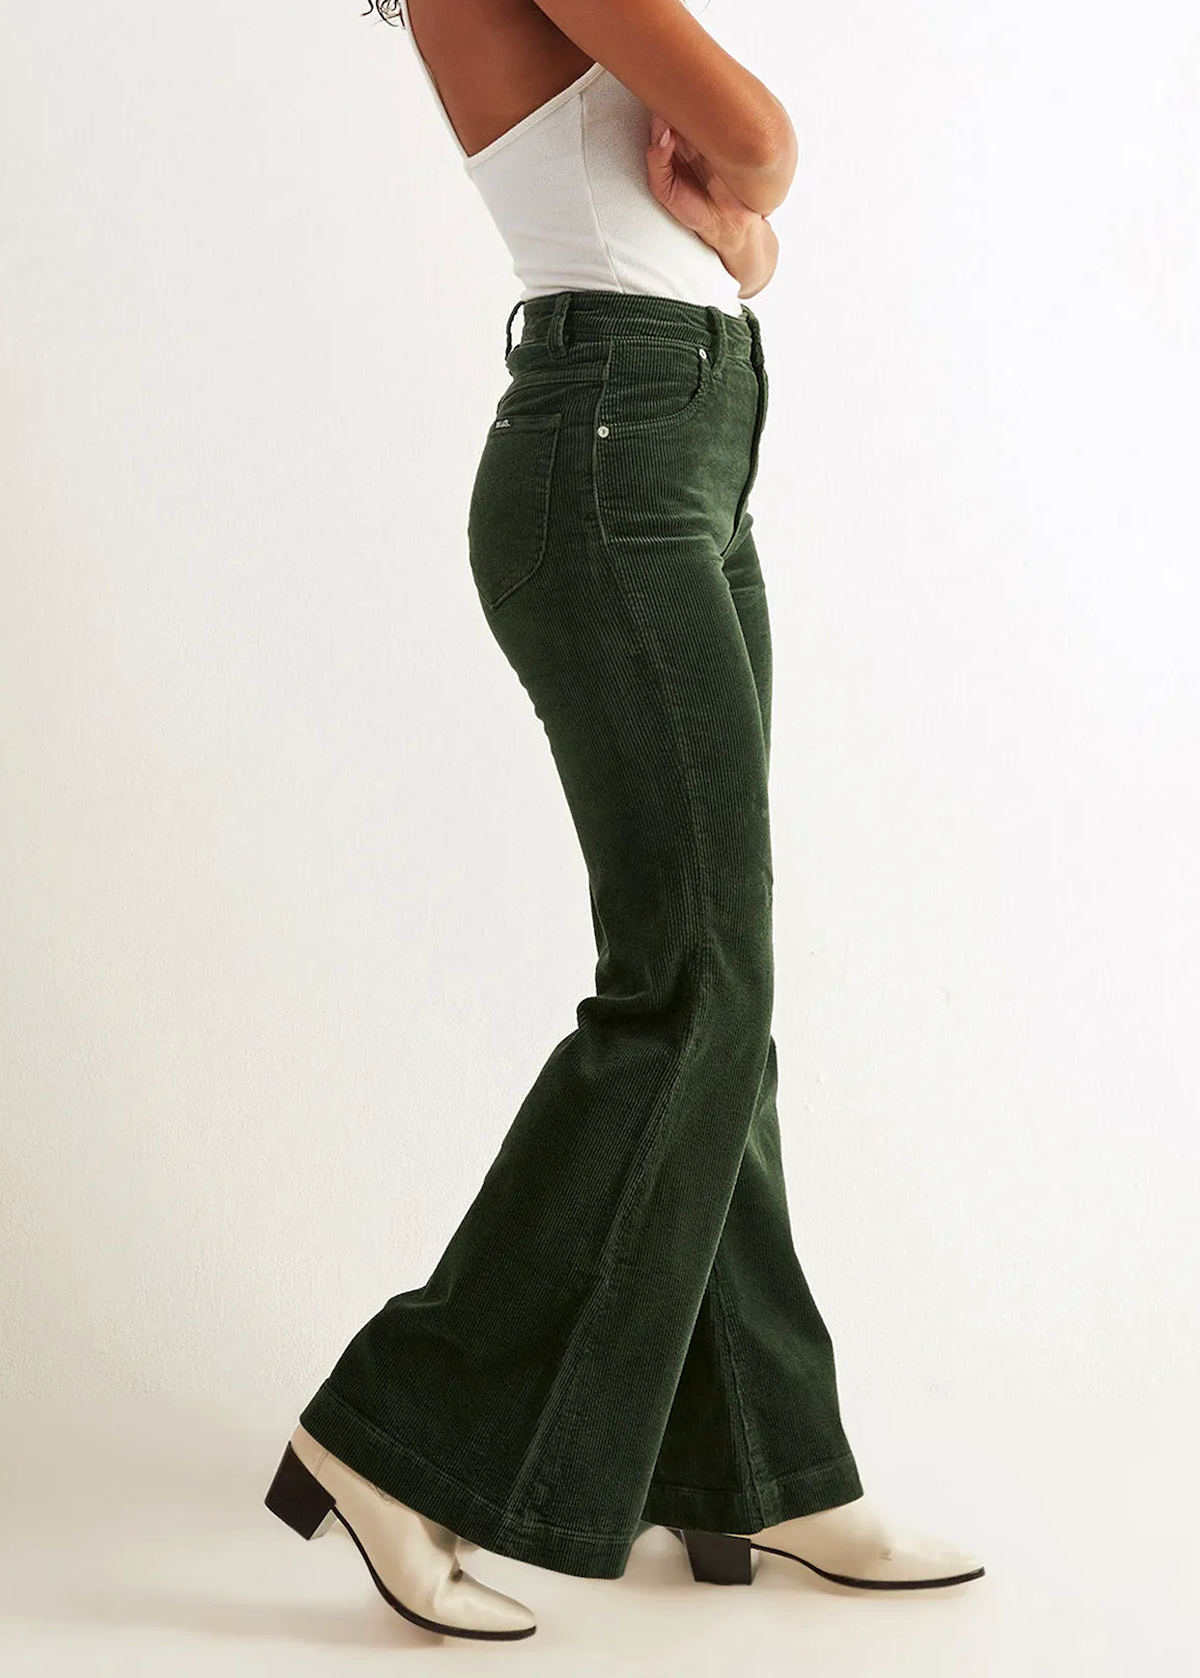 70s inspired Ivy Green Corduroy Eastcoast Flares with high rise waist by Rolla's Jeans